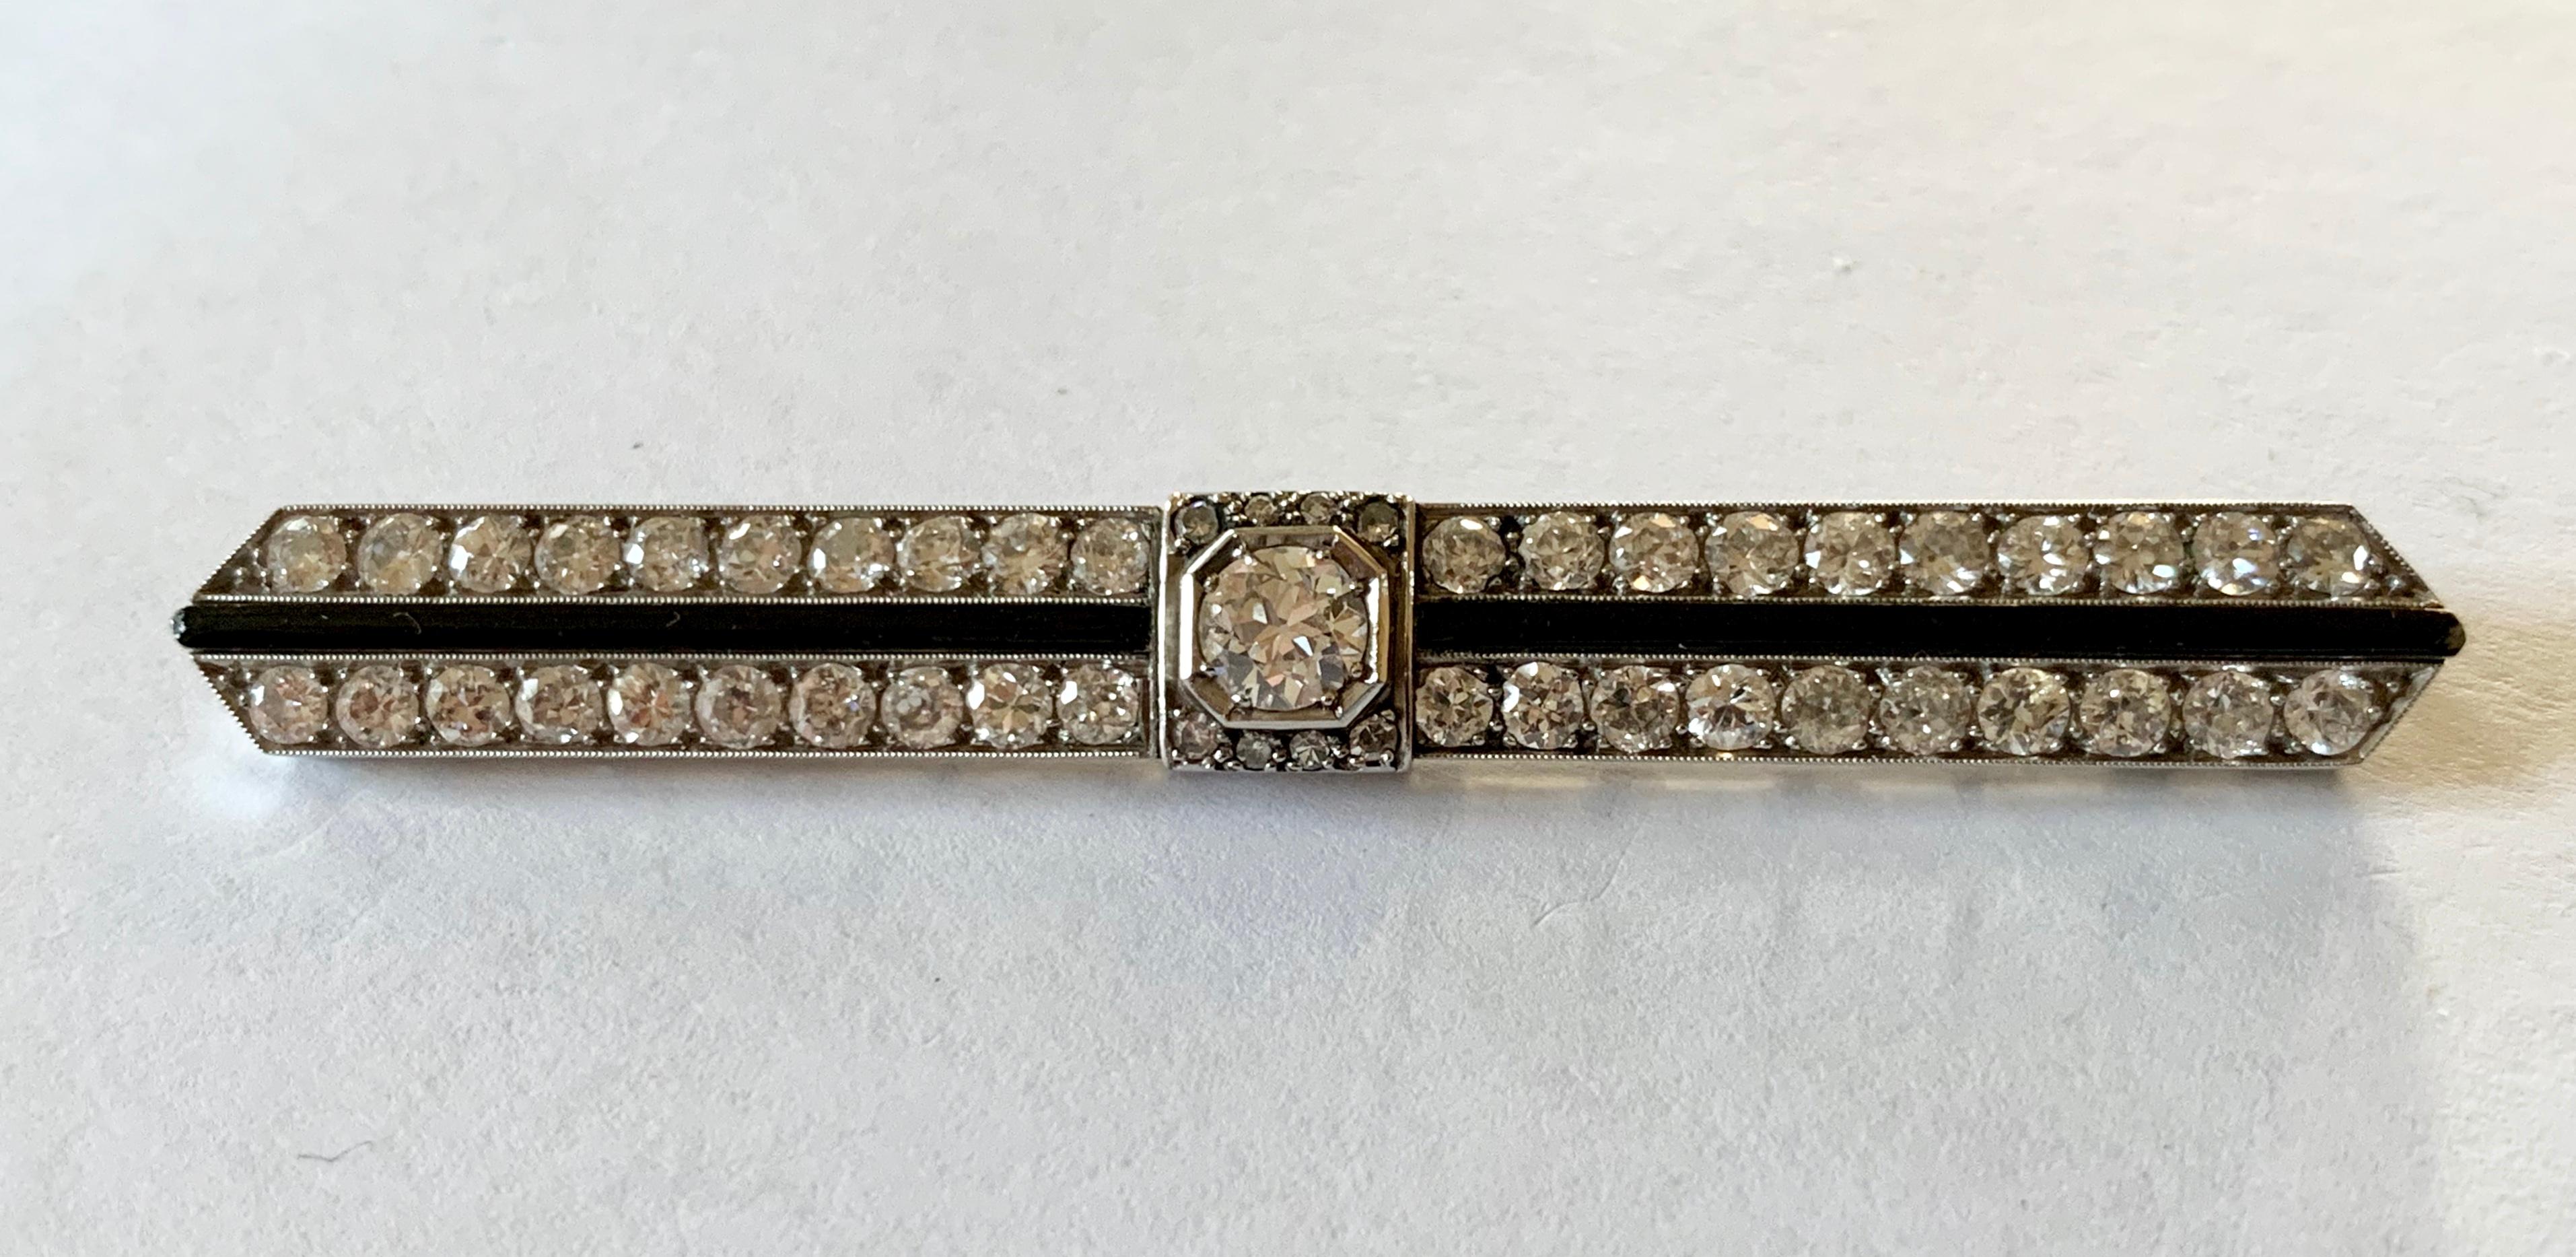  A superb and stylish  Art Deco diamond and Onyx bar pin brooch  featuring a center diamond weighting approximately 0.50 ct. Around the center diamond are approximately 2 ct of old cut diamonds and Onyx,  all set in platinum. A brooch from the early